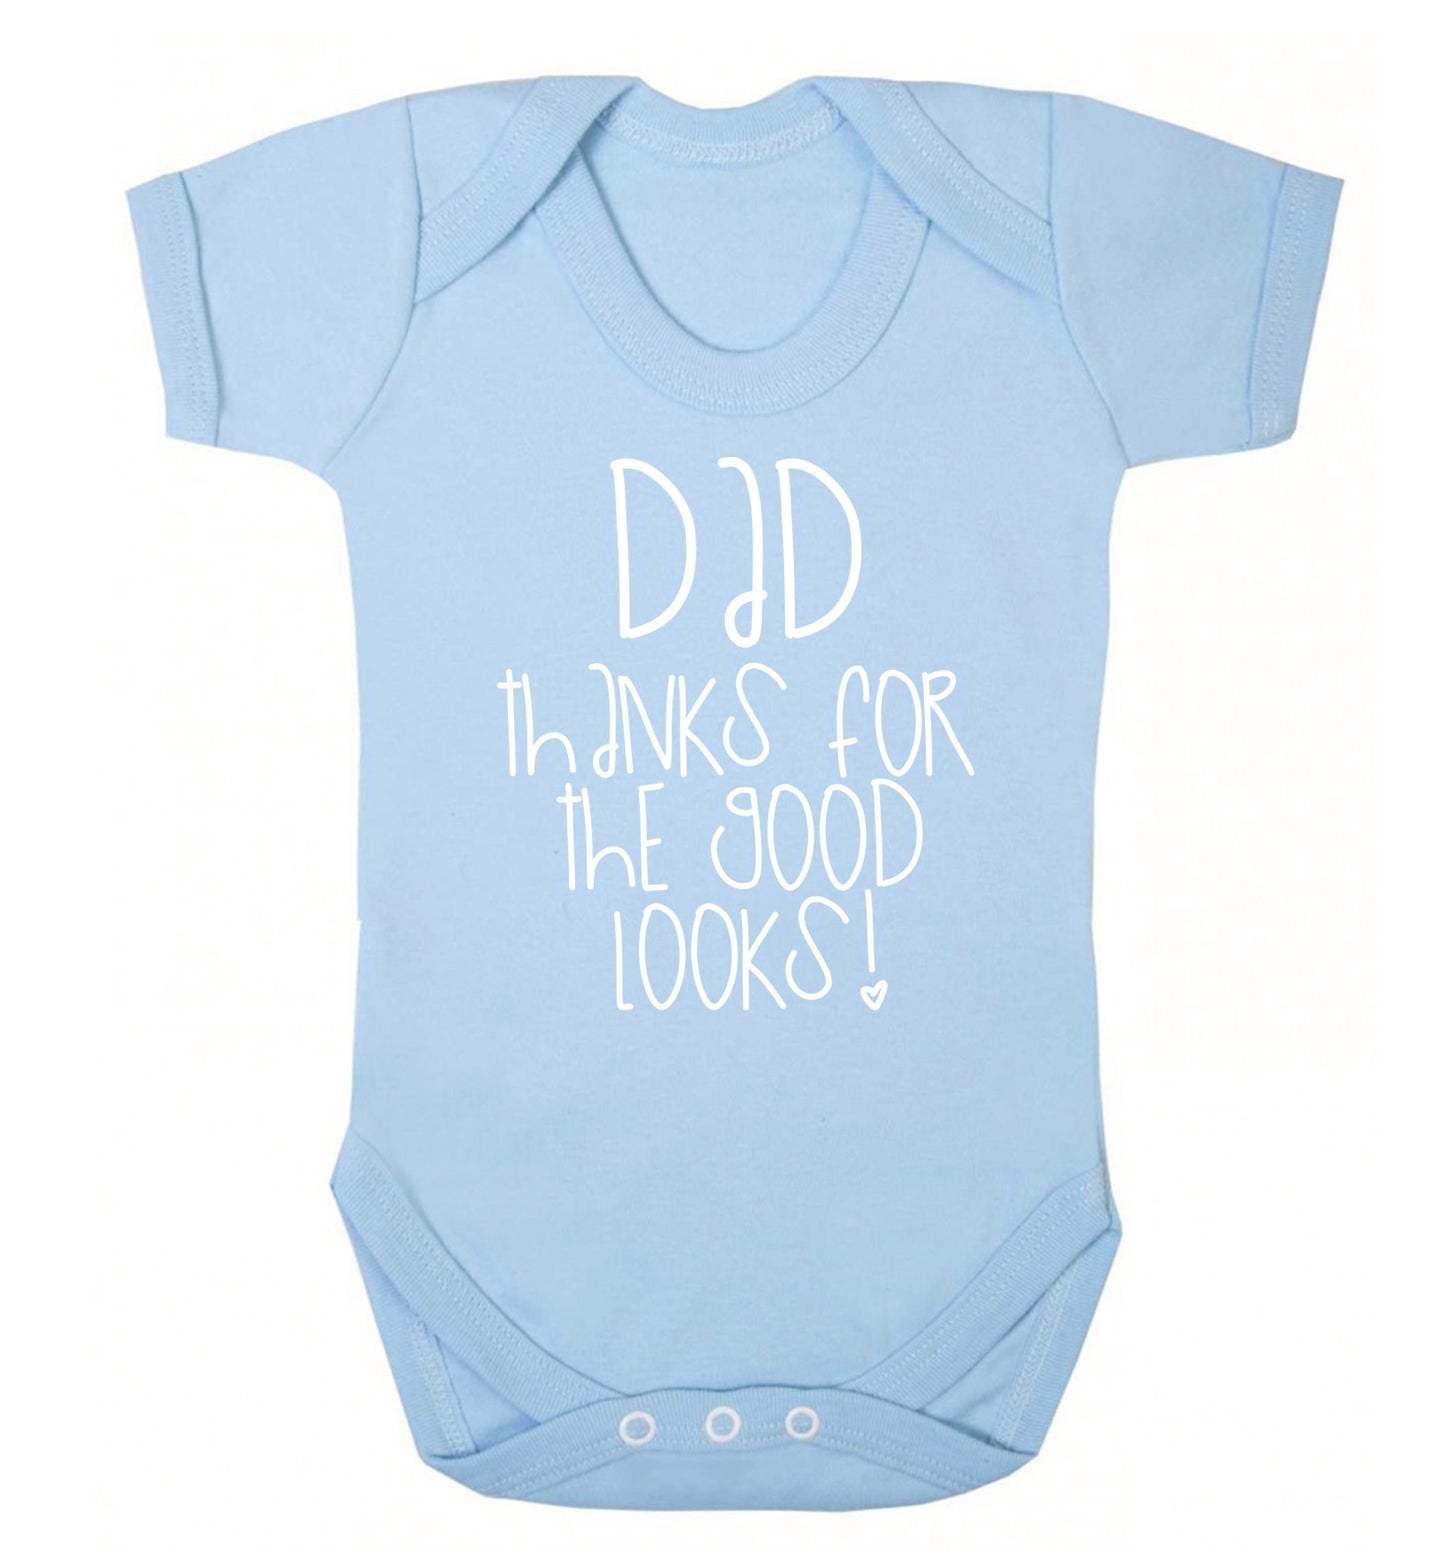 Dad thanks for the good looks Baby Vest pale blue 18-24 months